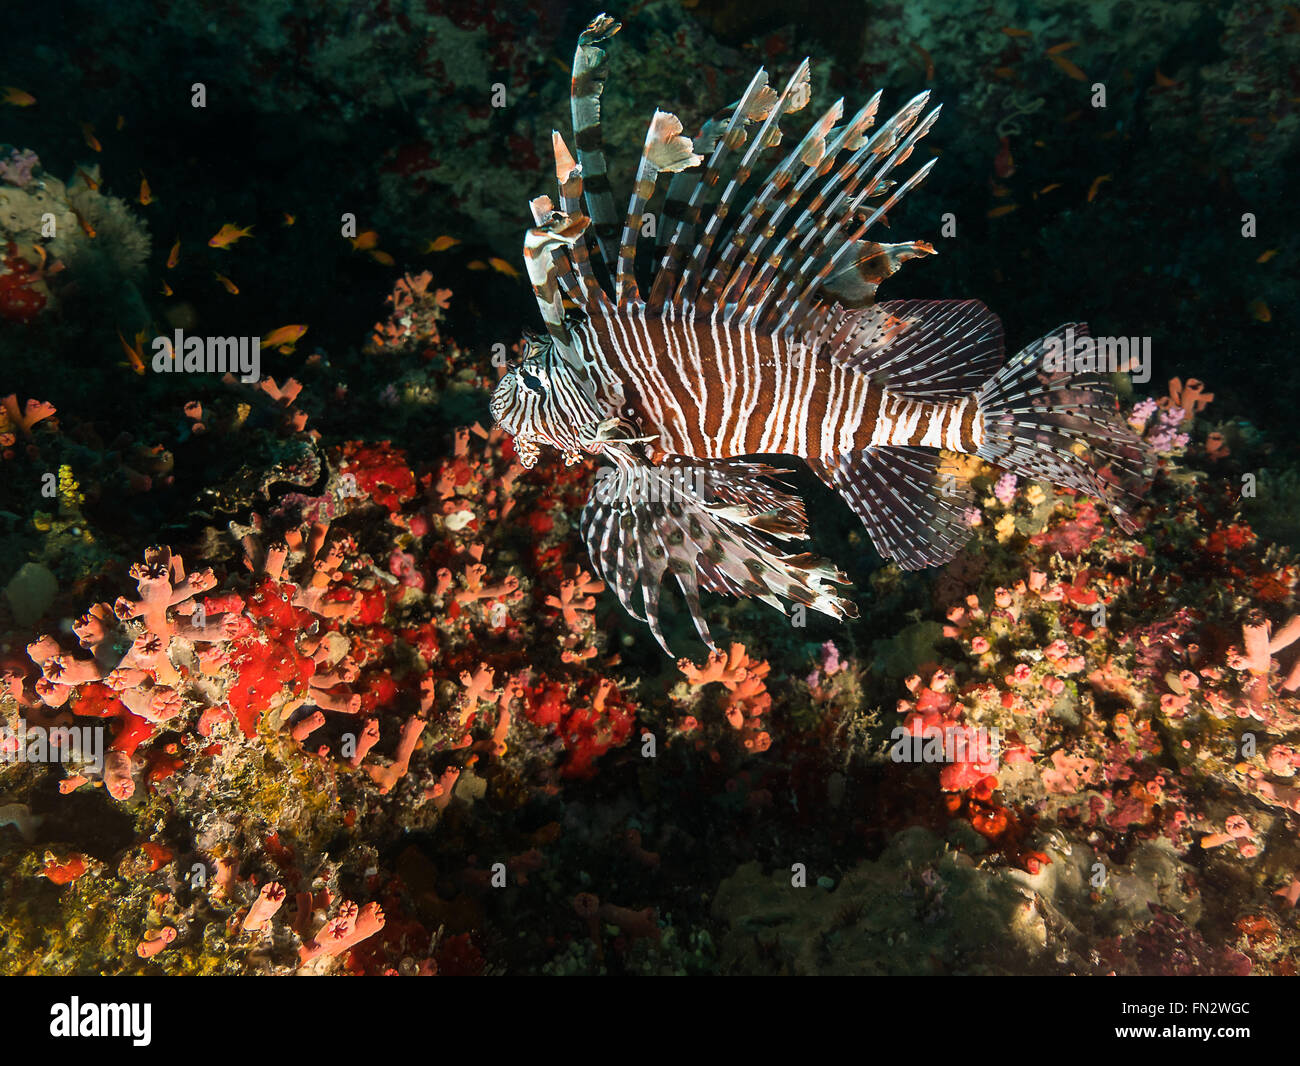 A lionfish hovers above an arc of hard and soft corals on a reef in the Maldives, small orange fish move through the coral below Stock Photo